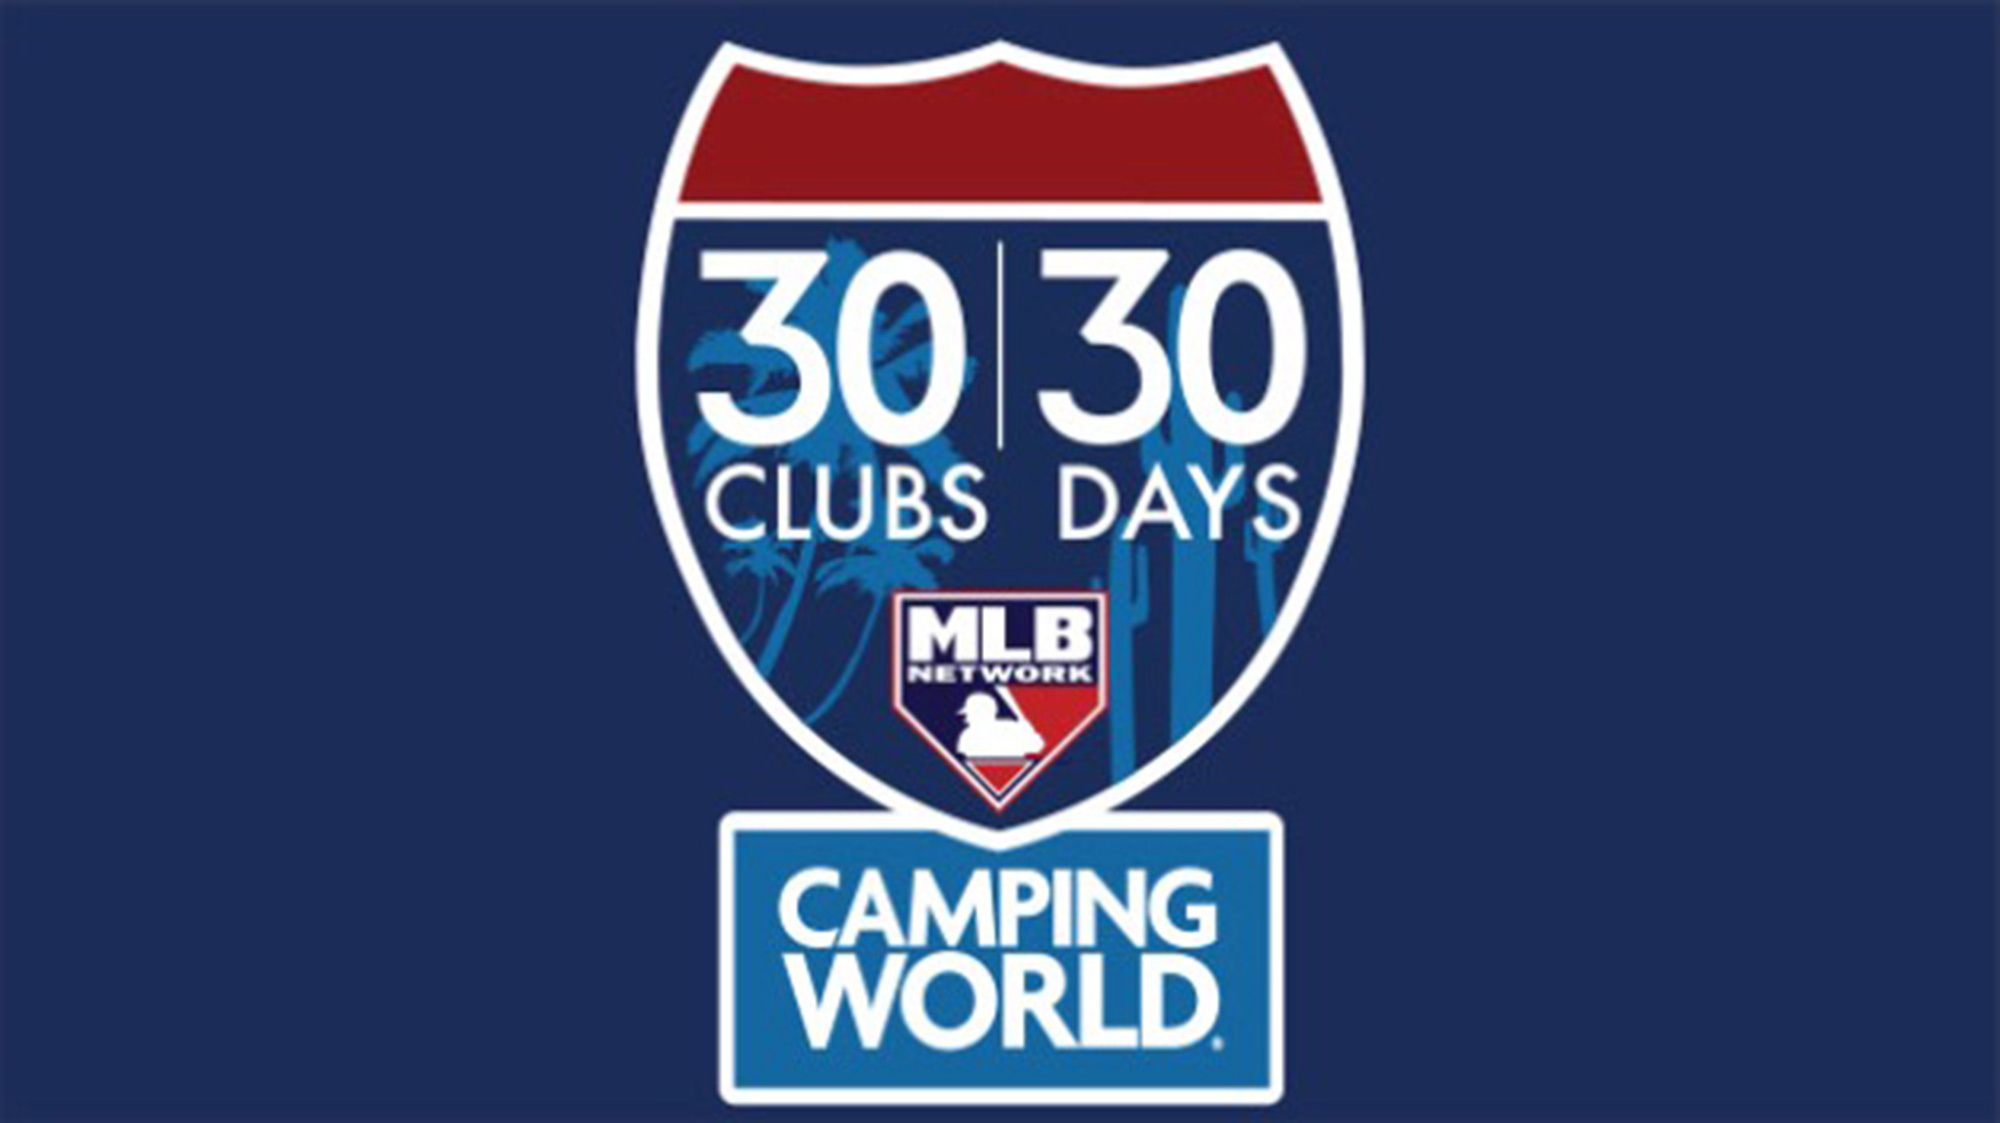 Play Ball! MLB Network's '30 Clubs in 30 Days' 2018 Spring Training